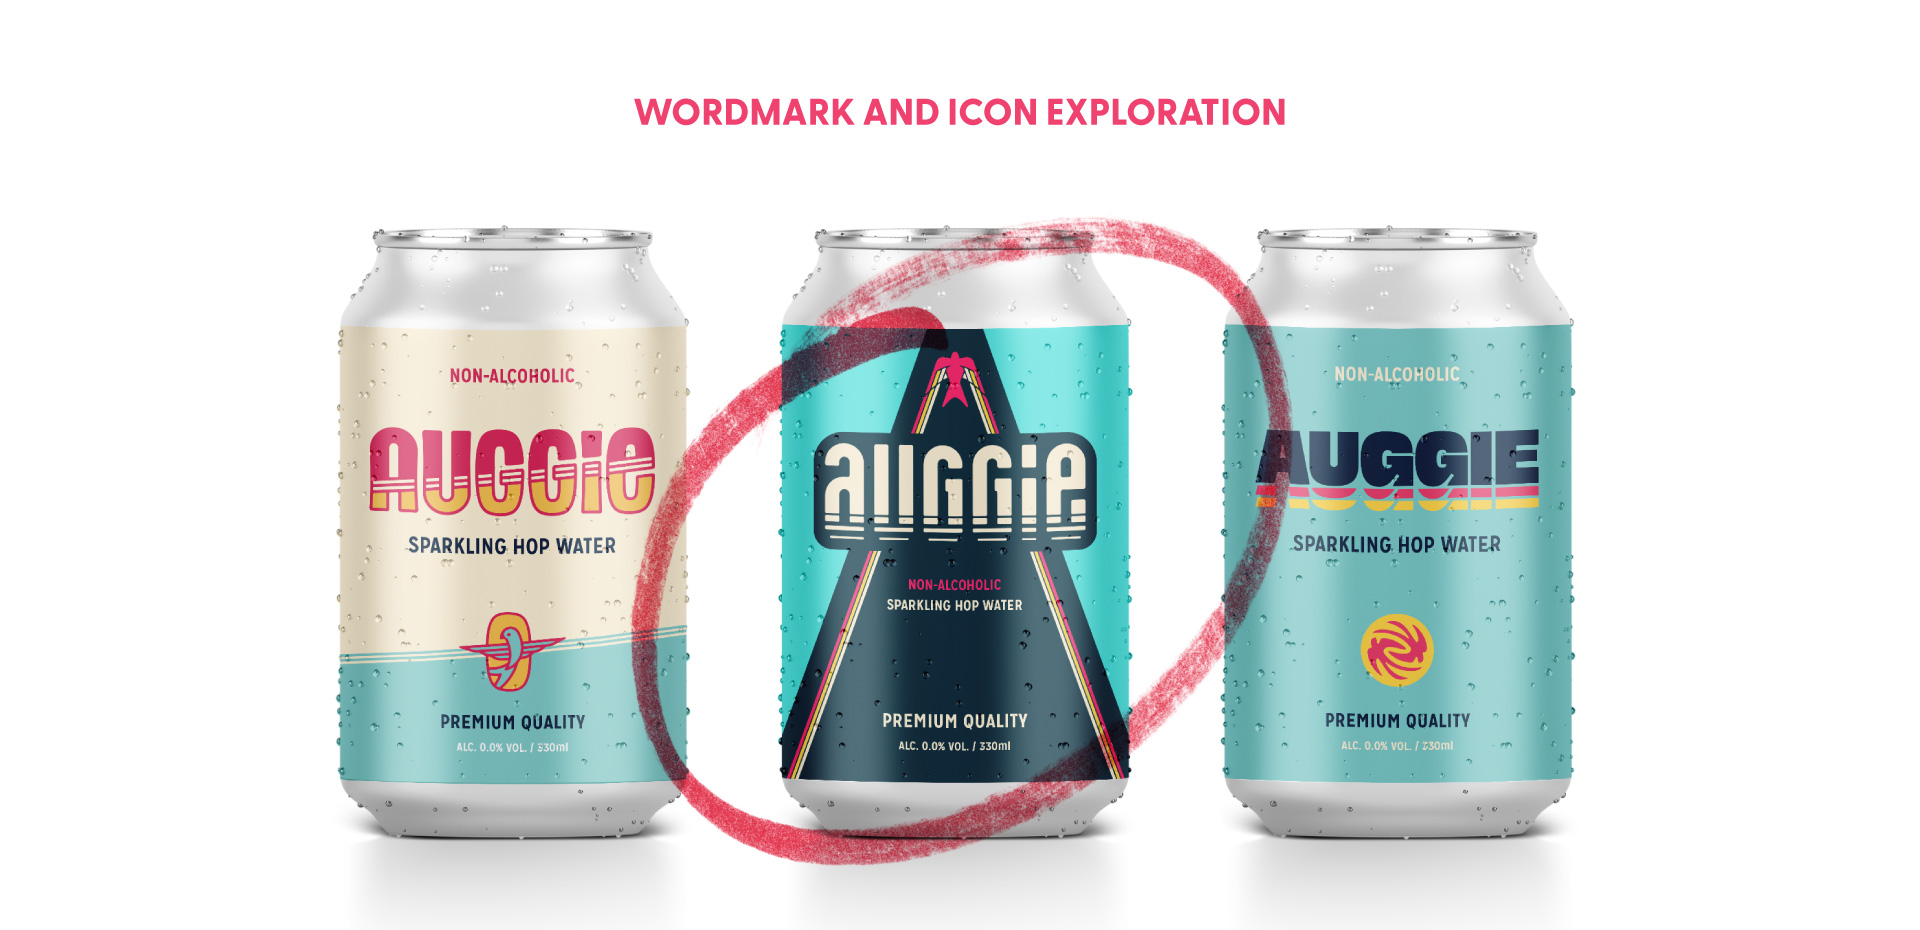 Auggie Beverages logo and icon exploration mocked up on cans